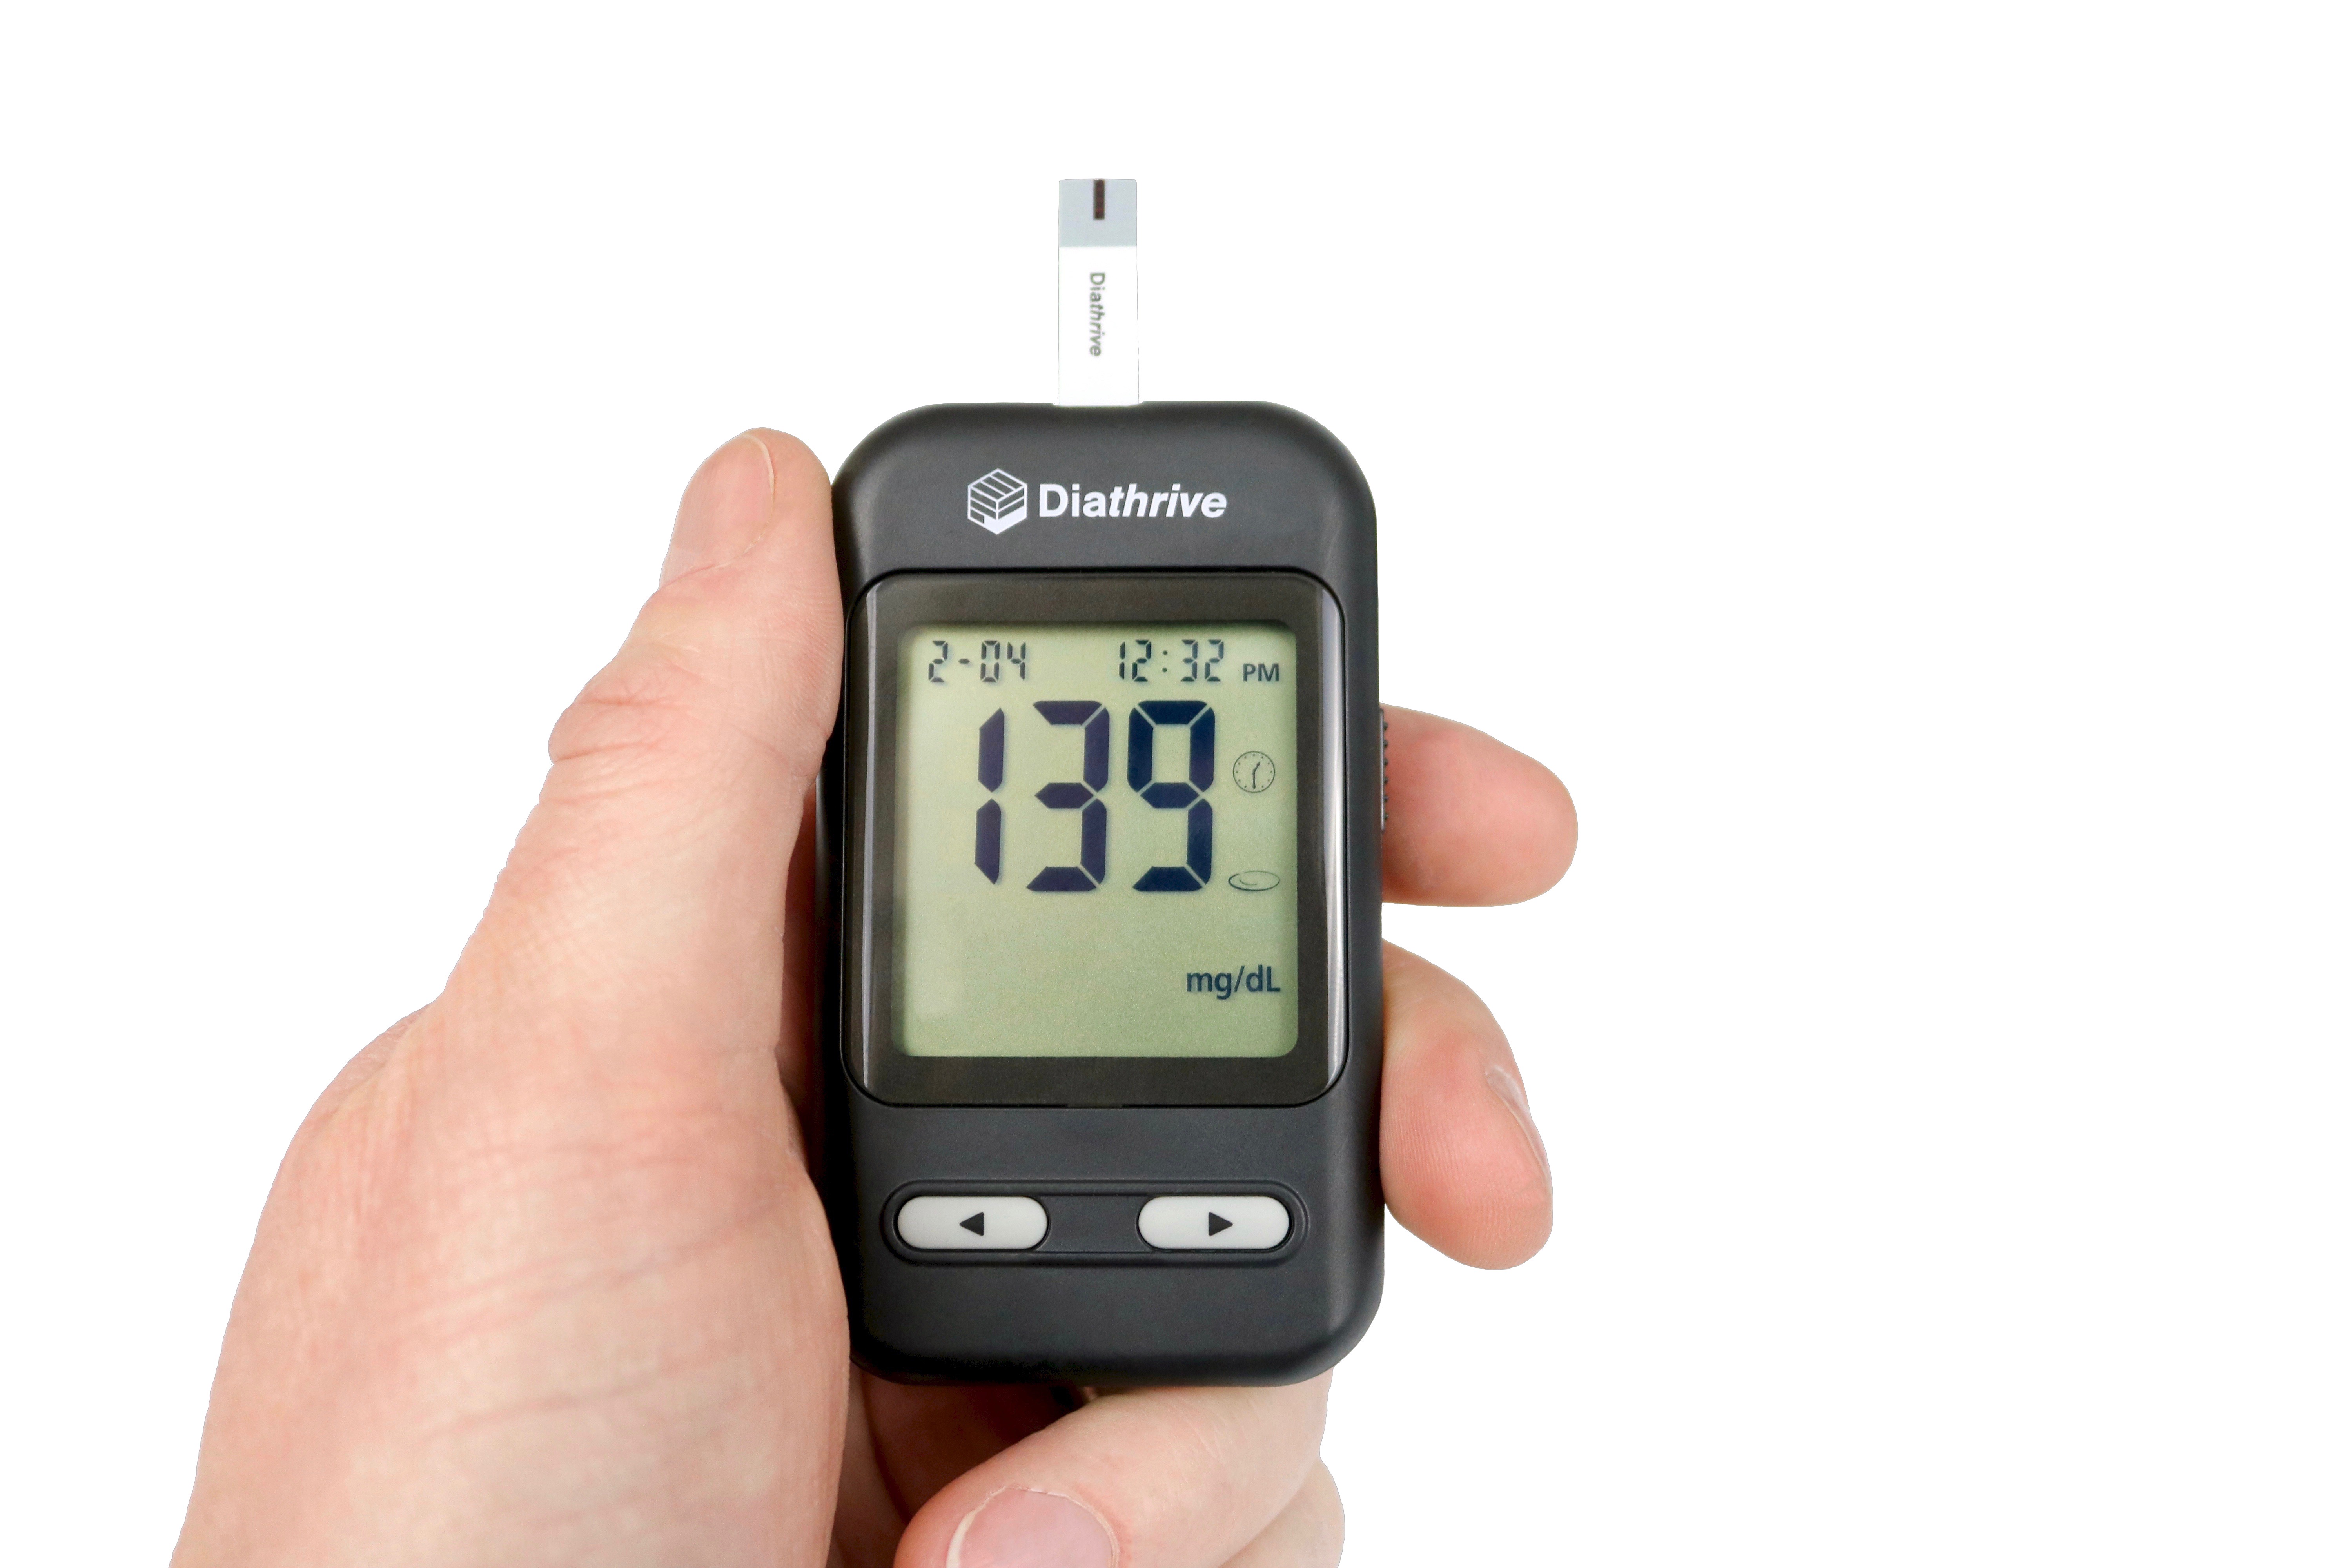 Hand holding a Diathrive blood glucose meter